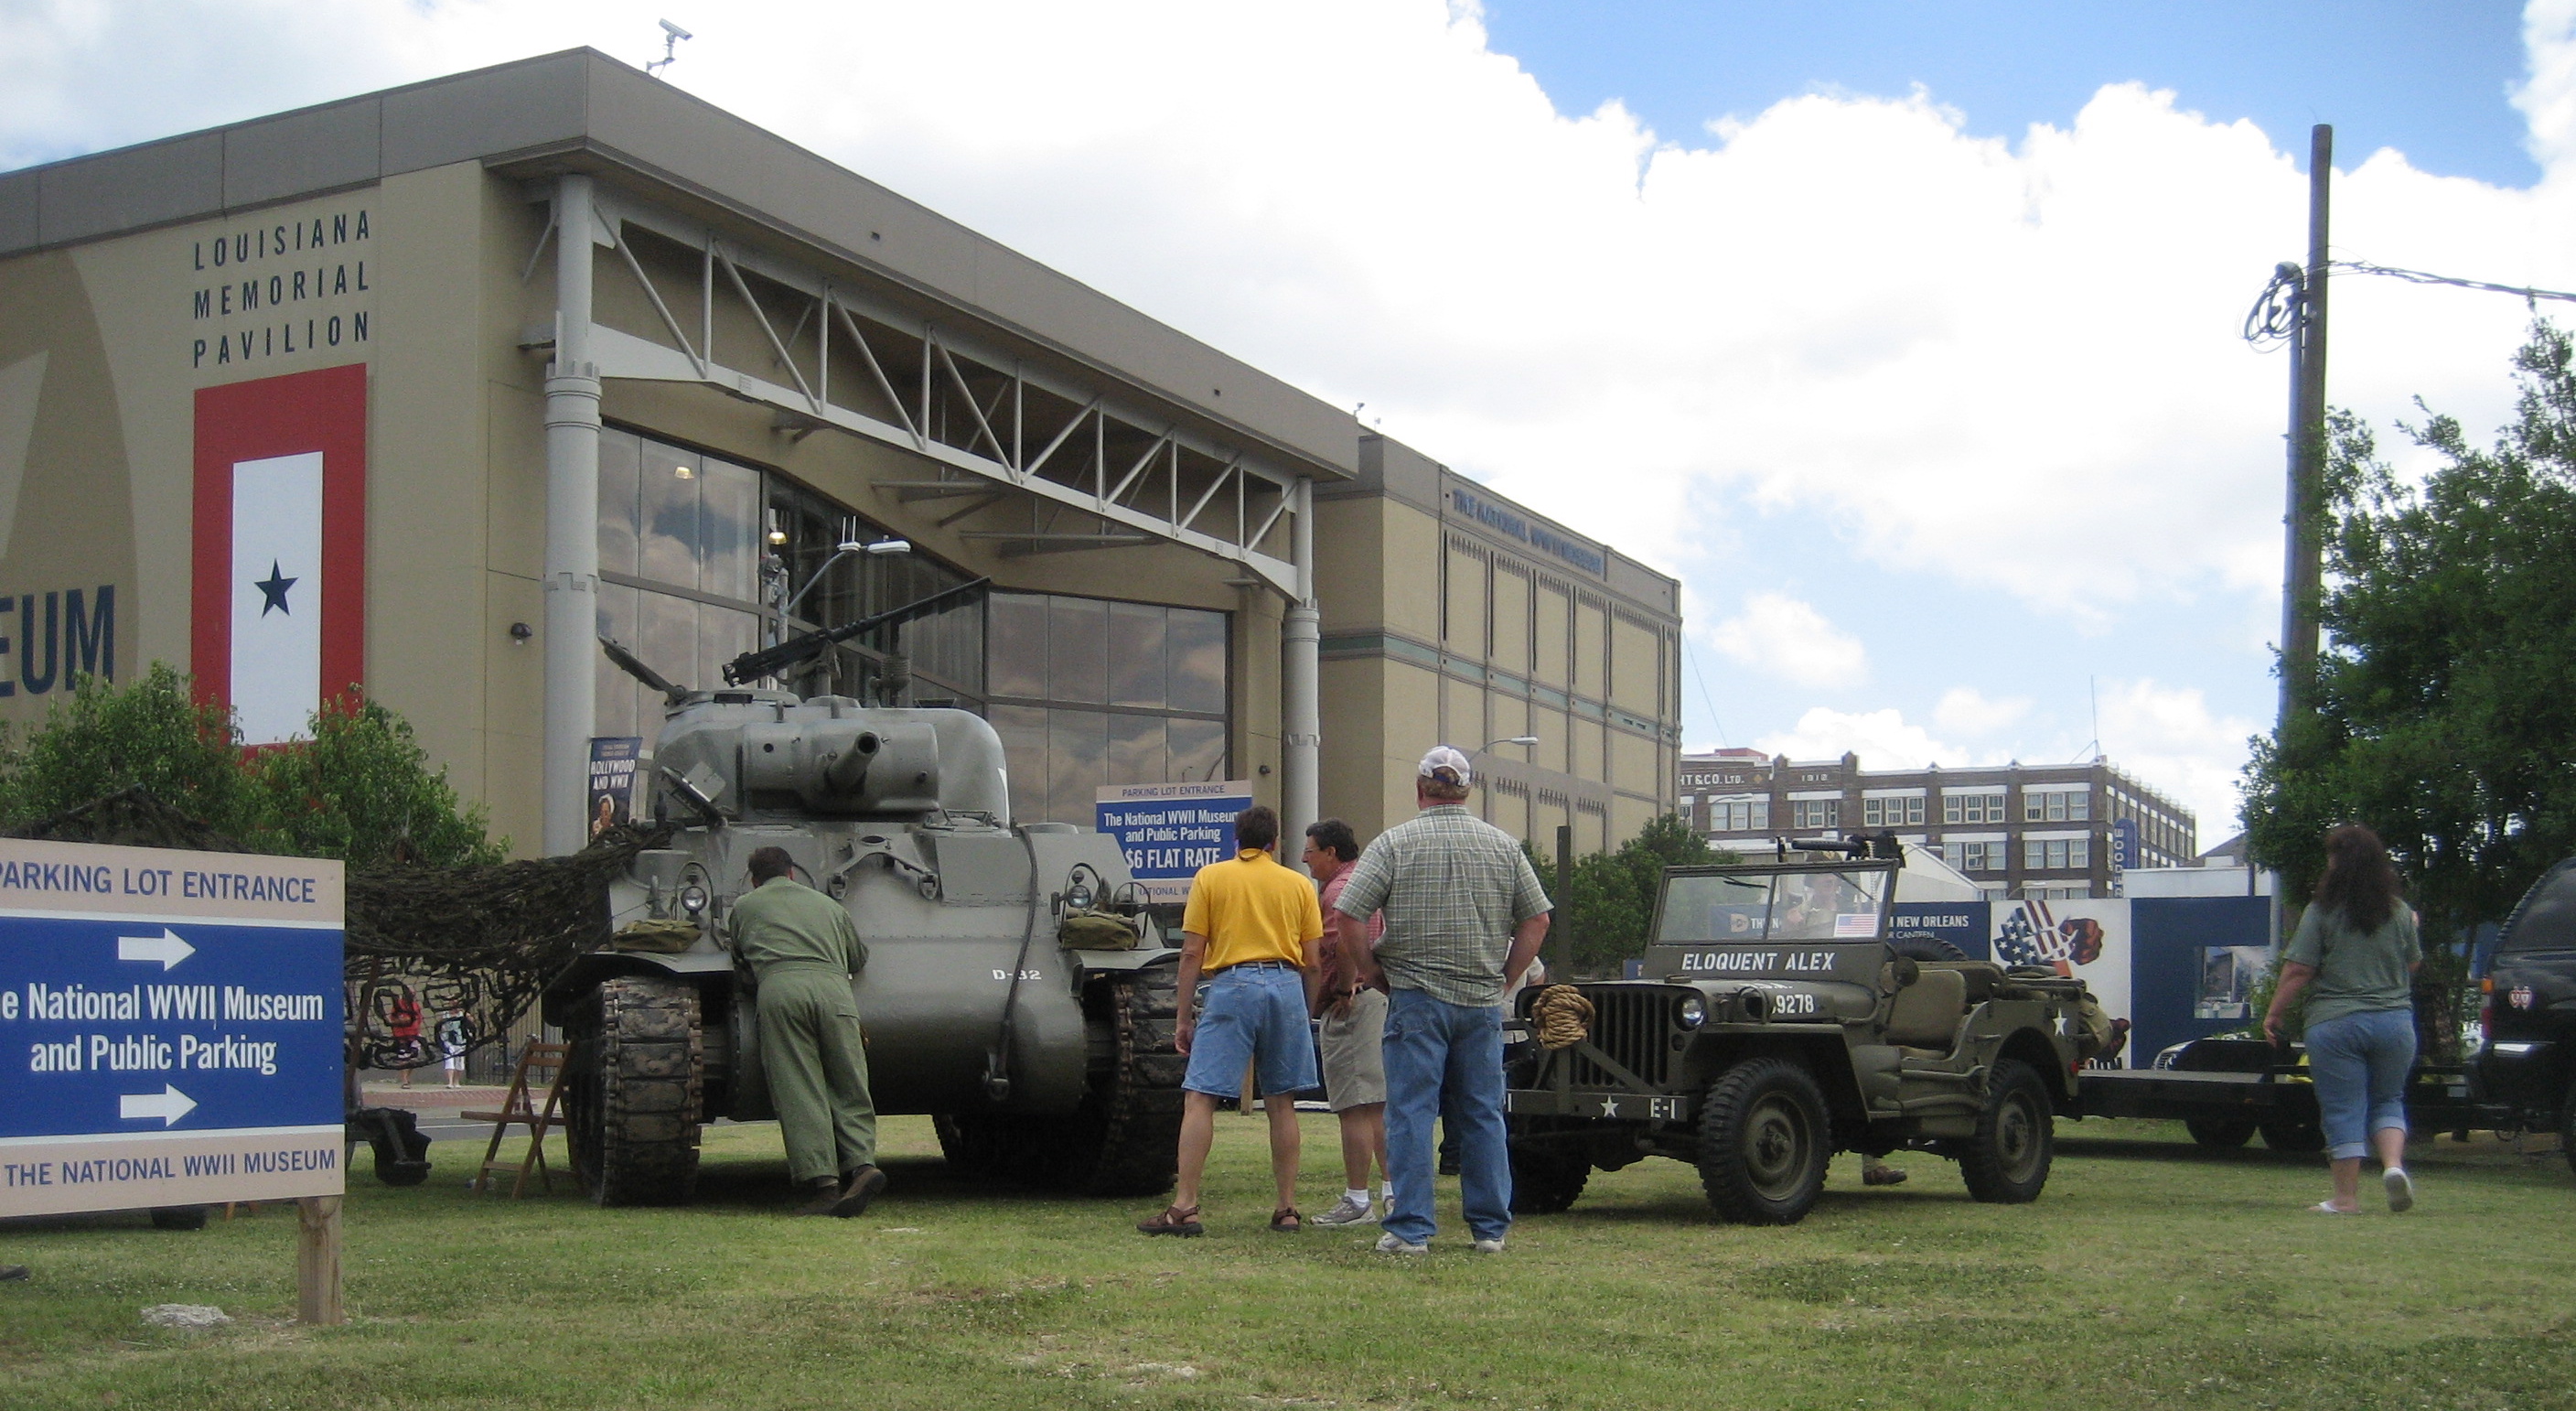 Travel Thru History Visit the National WWII Museum, New Orleans, LA - Travel Thru History